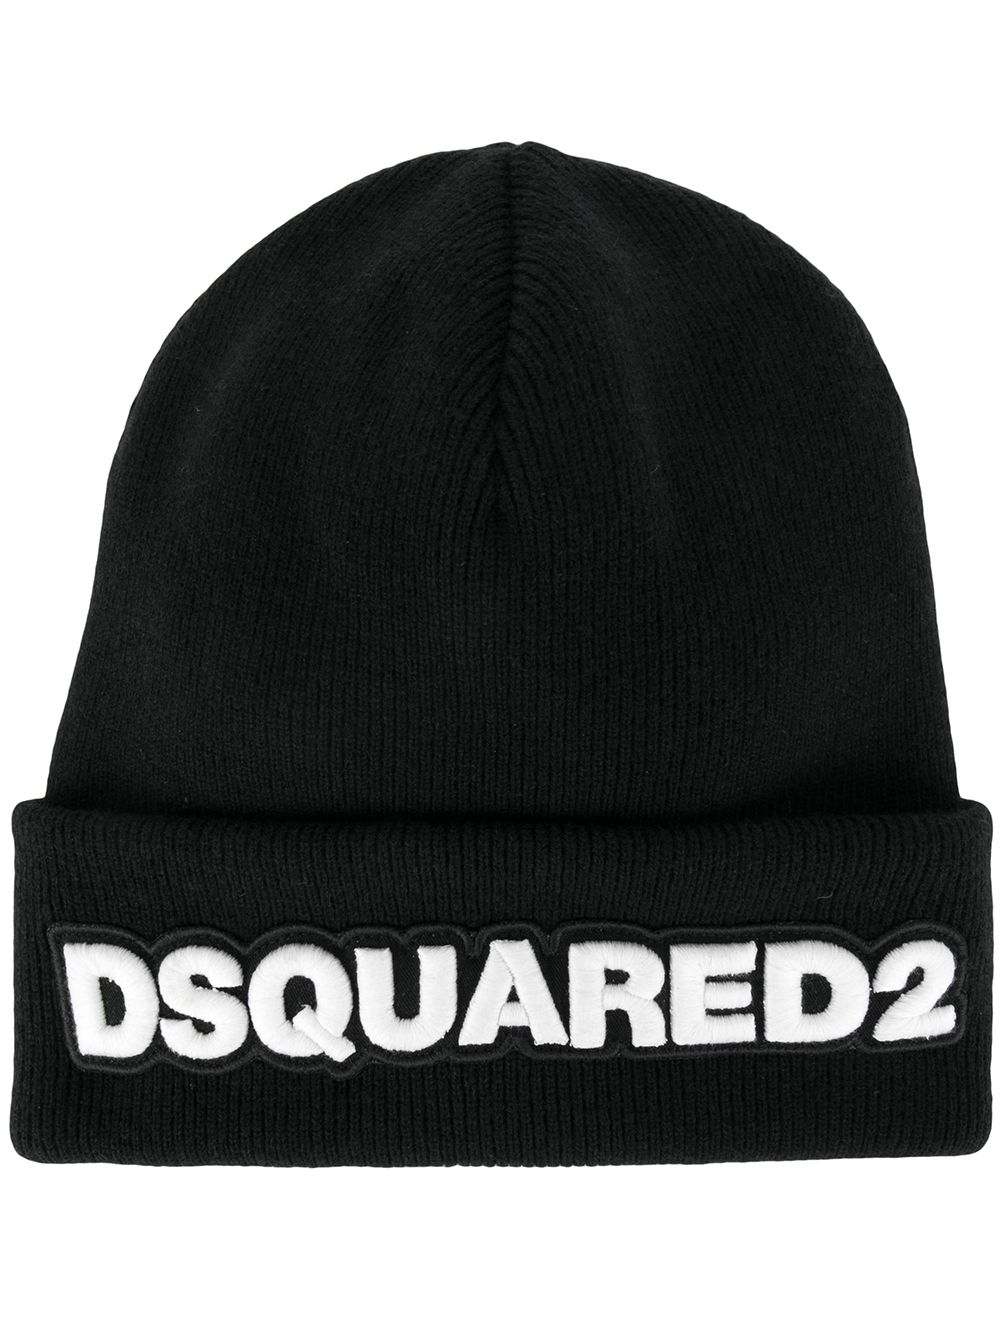 Dsquared2 logo patch ribbed beanie - Black von Dsquared2